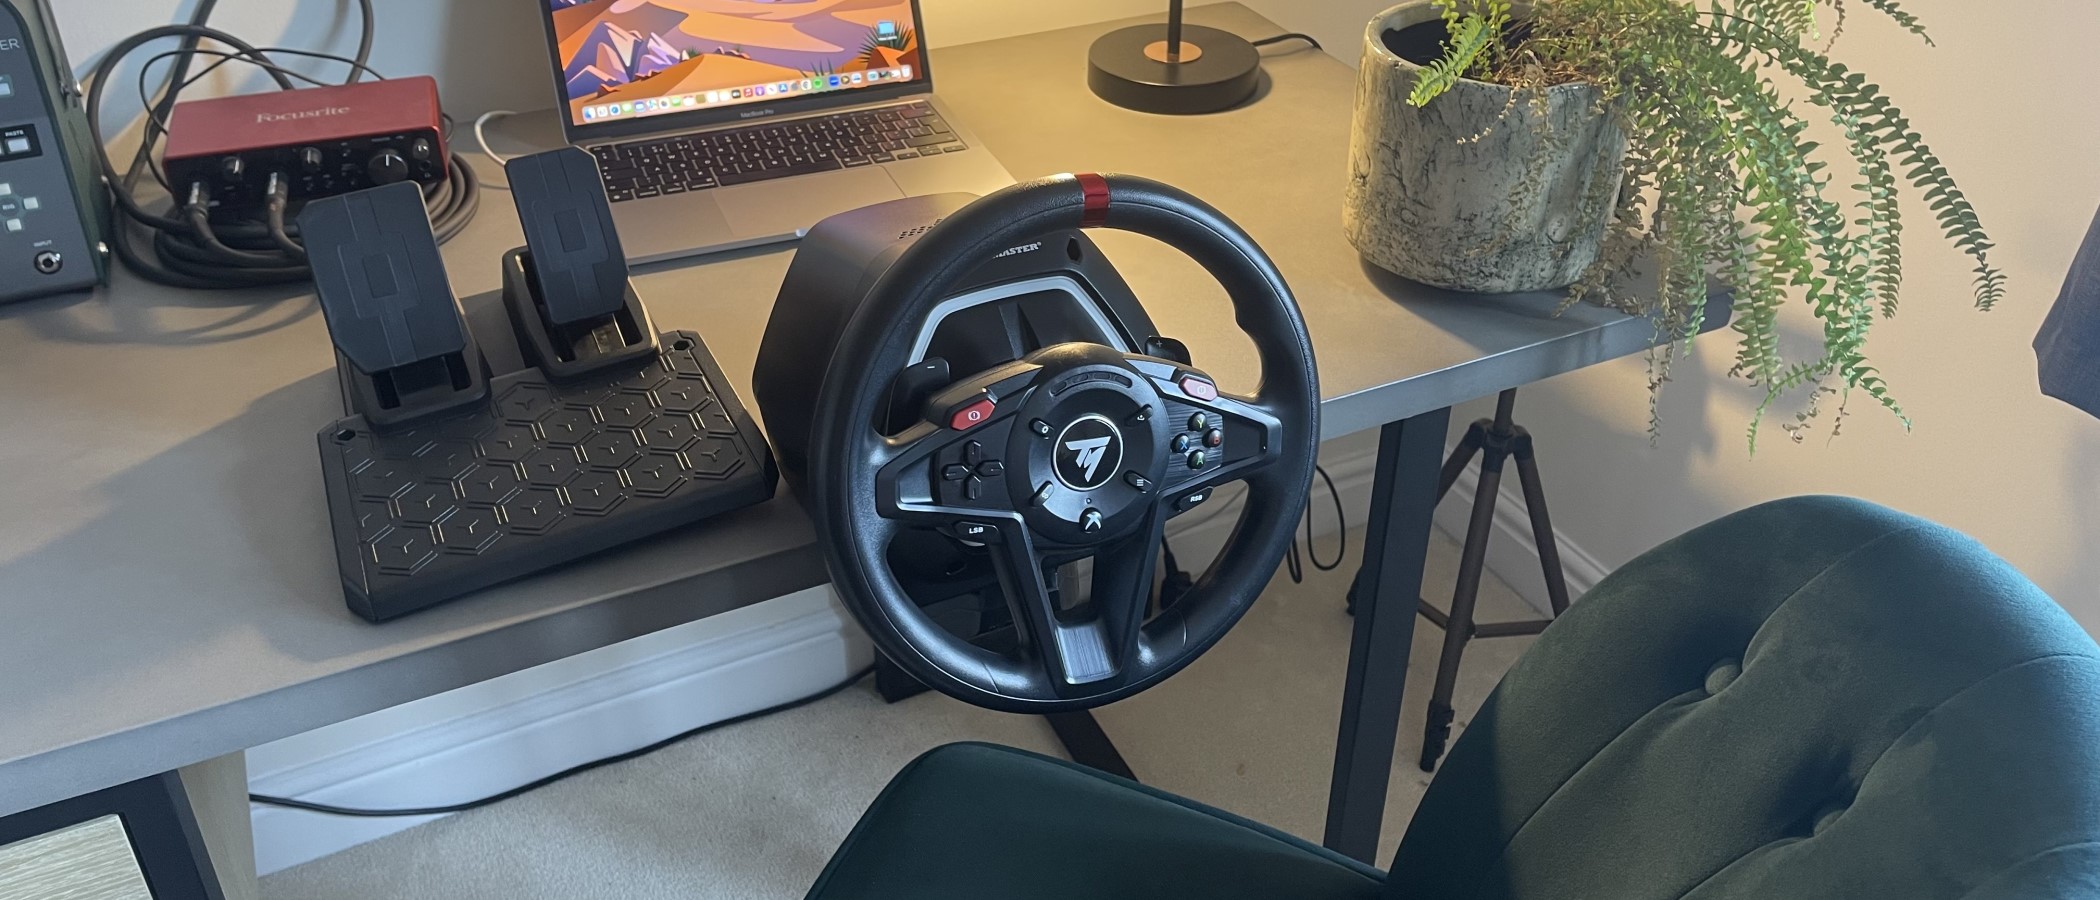 Thrustmaster T128 review: A decent option for younger or beginner